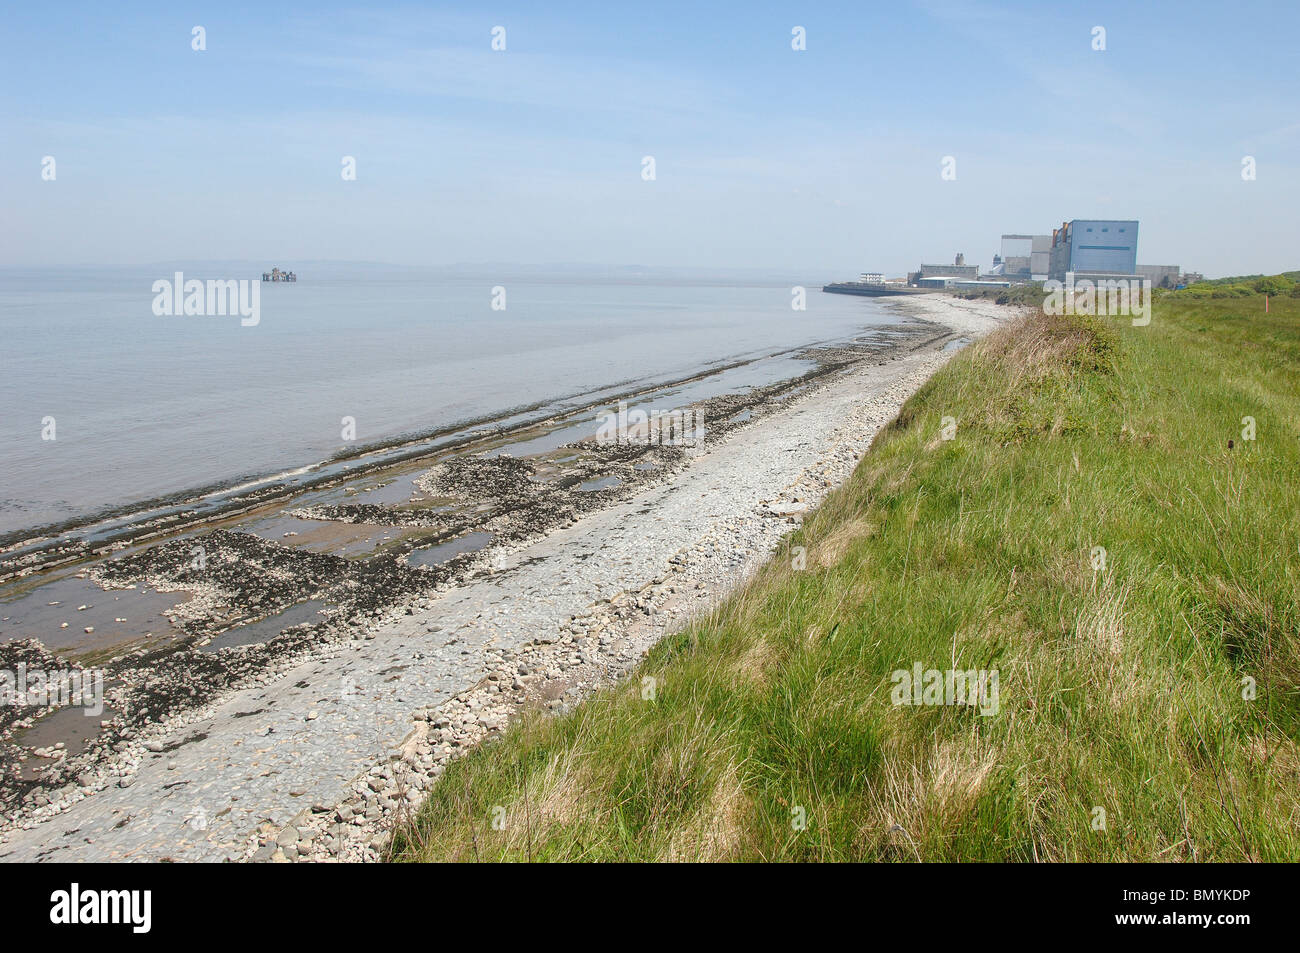 Beach where Proposed Hinkley C Nuclear Power station would be built with Existing Nuclear Stations behind Stock Photo